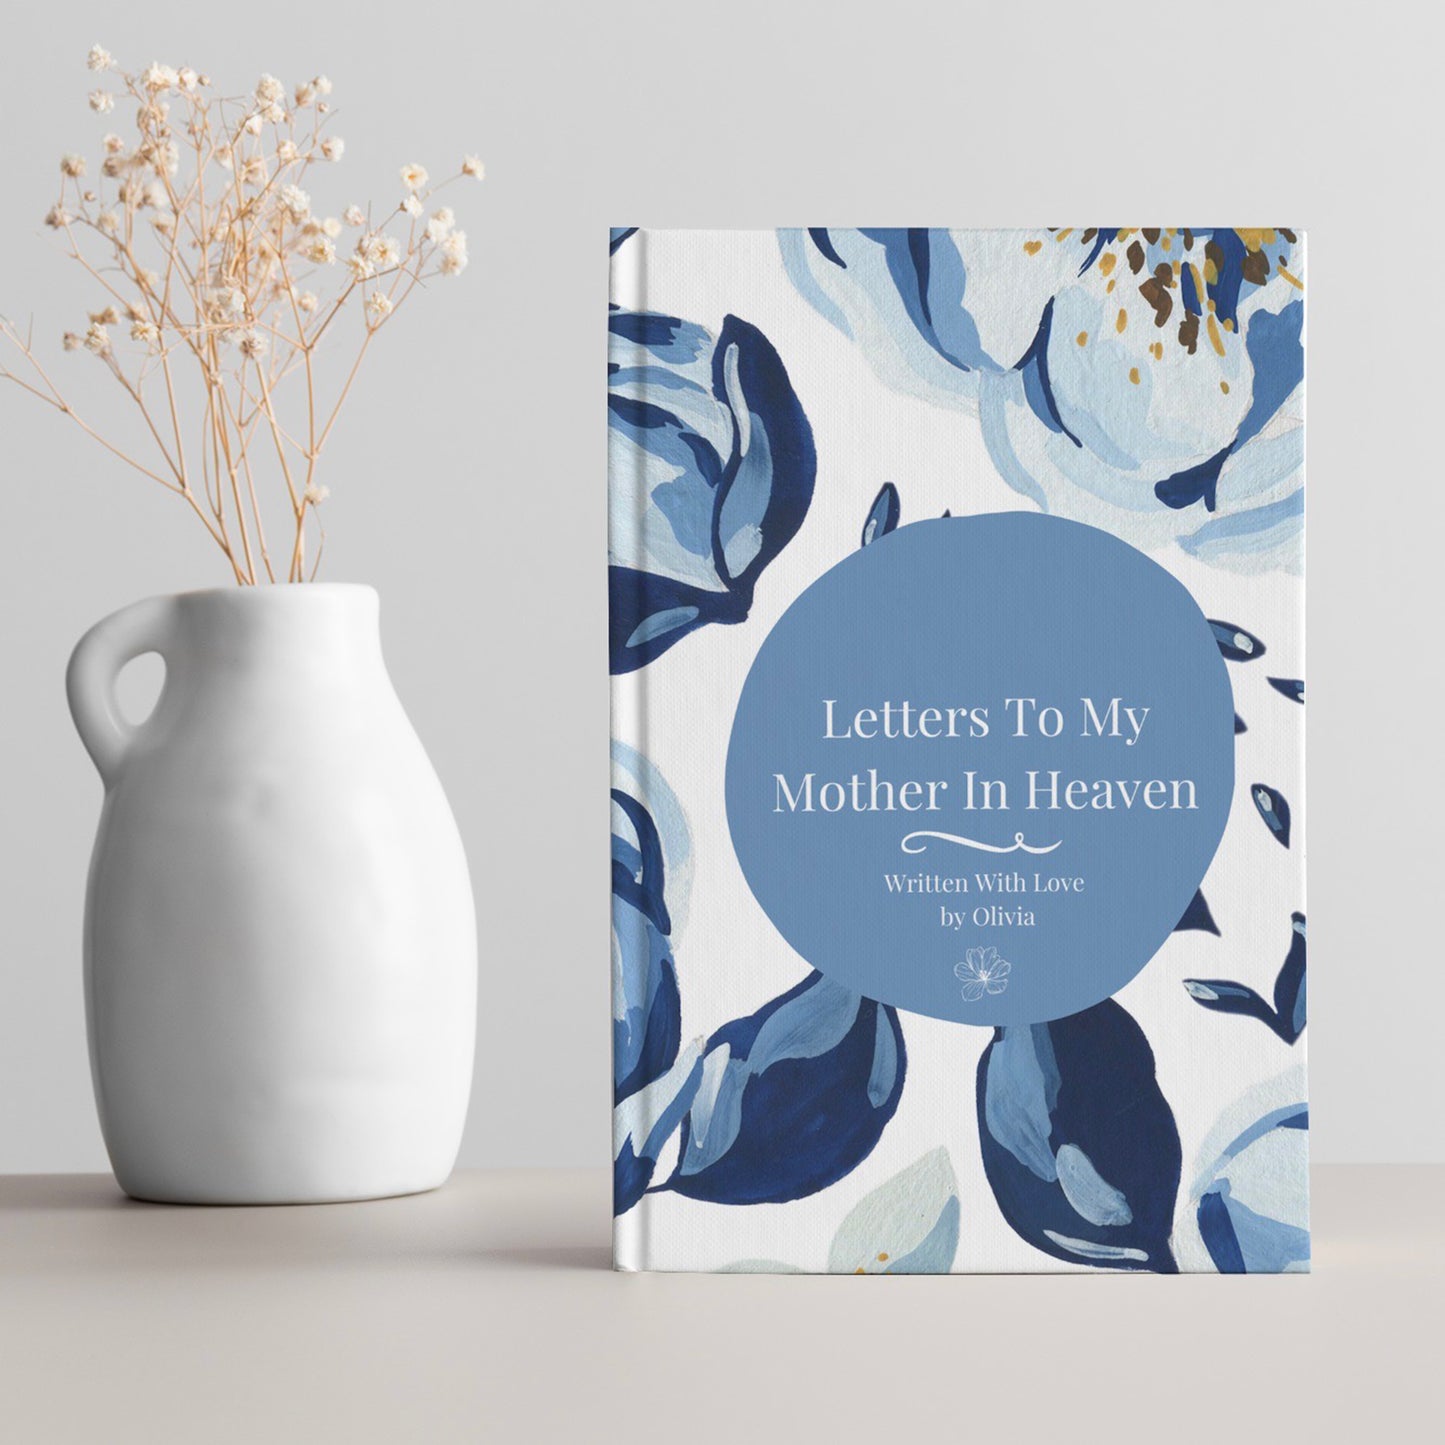 Grief Journal For Loss Of Mother. Letters To My Mother In Heaven. Luhvee Books.